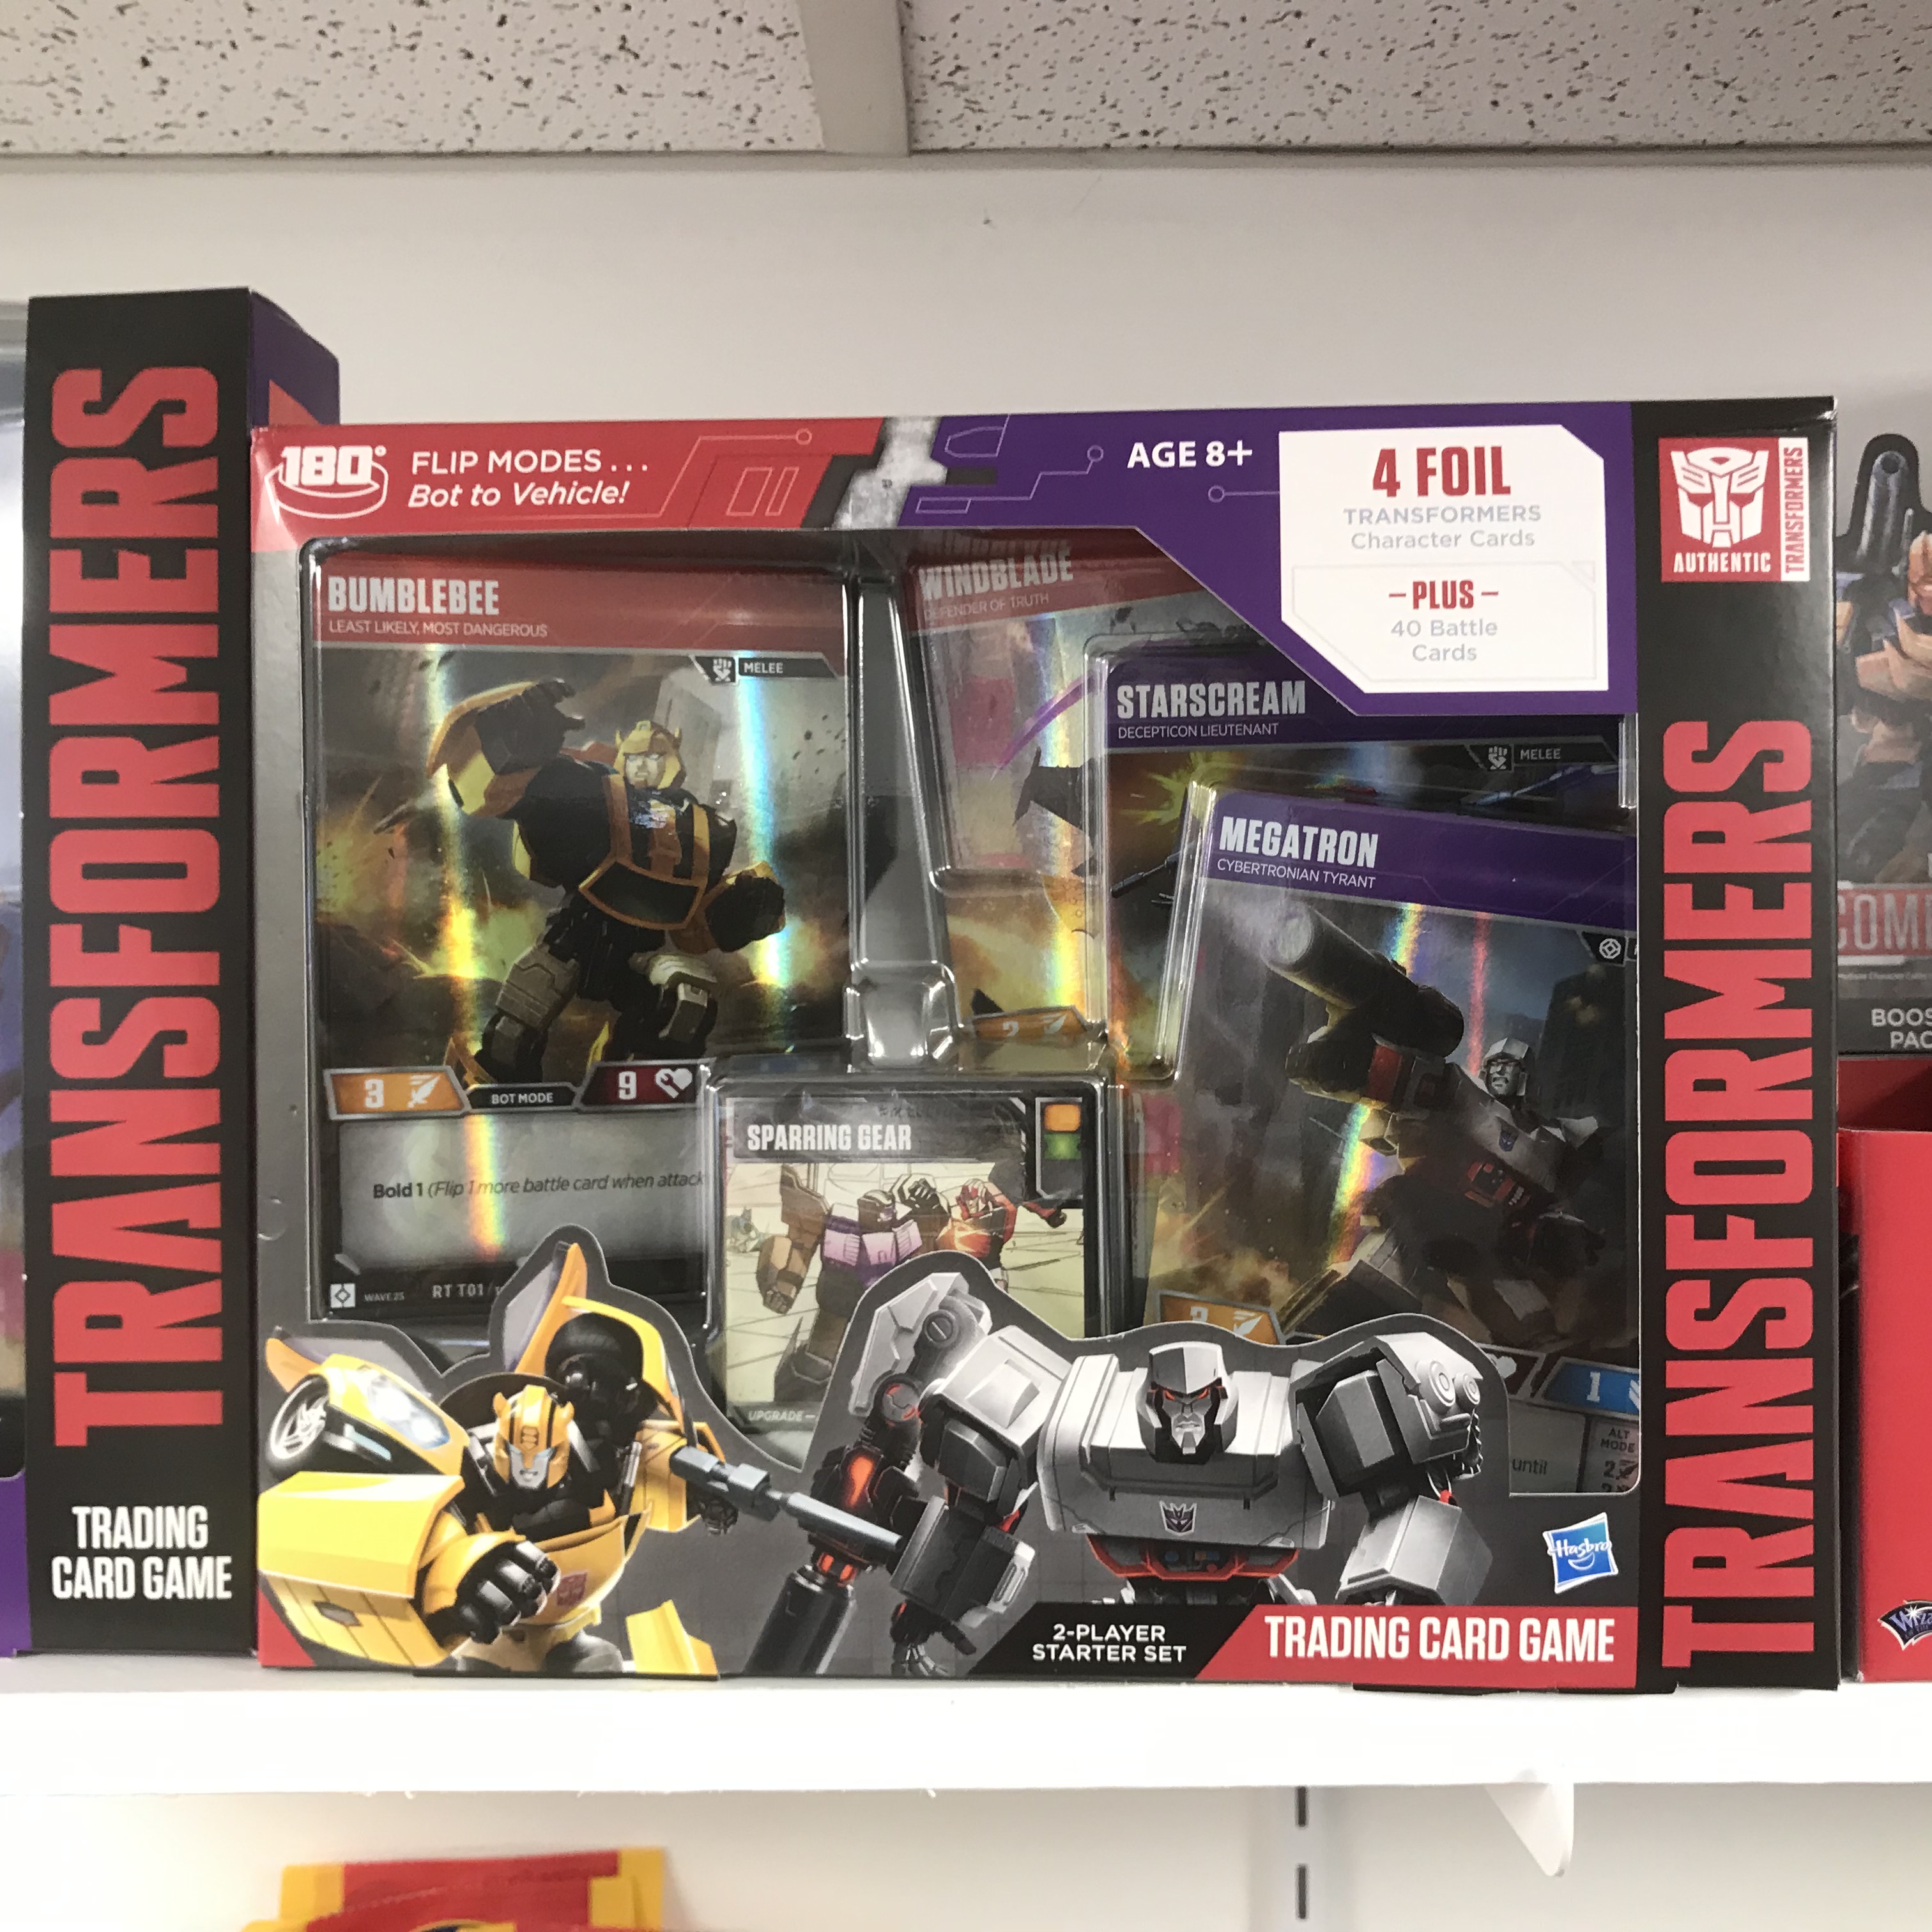 Transformers TCG, War of the Spark, and May White Dwarf!